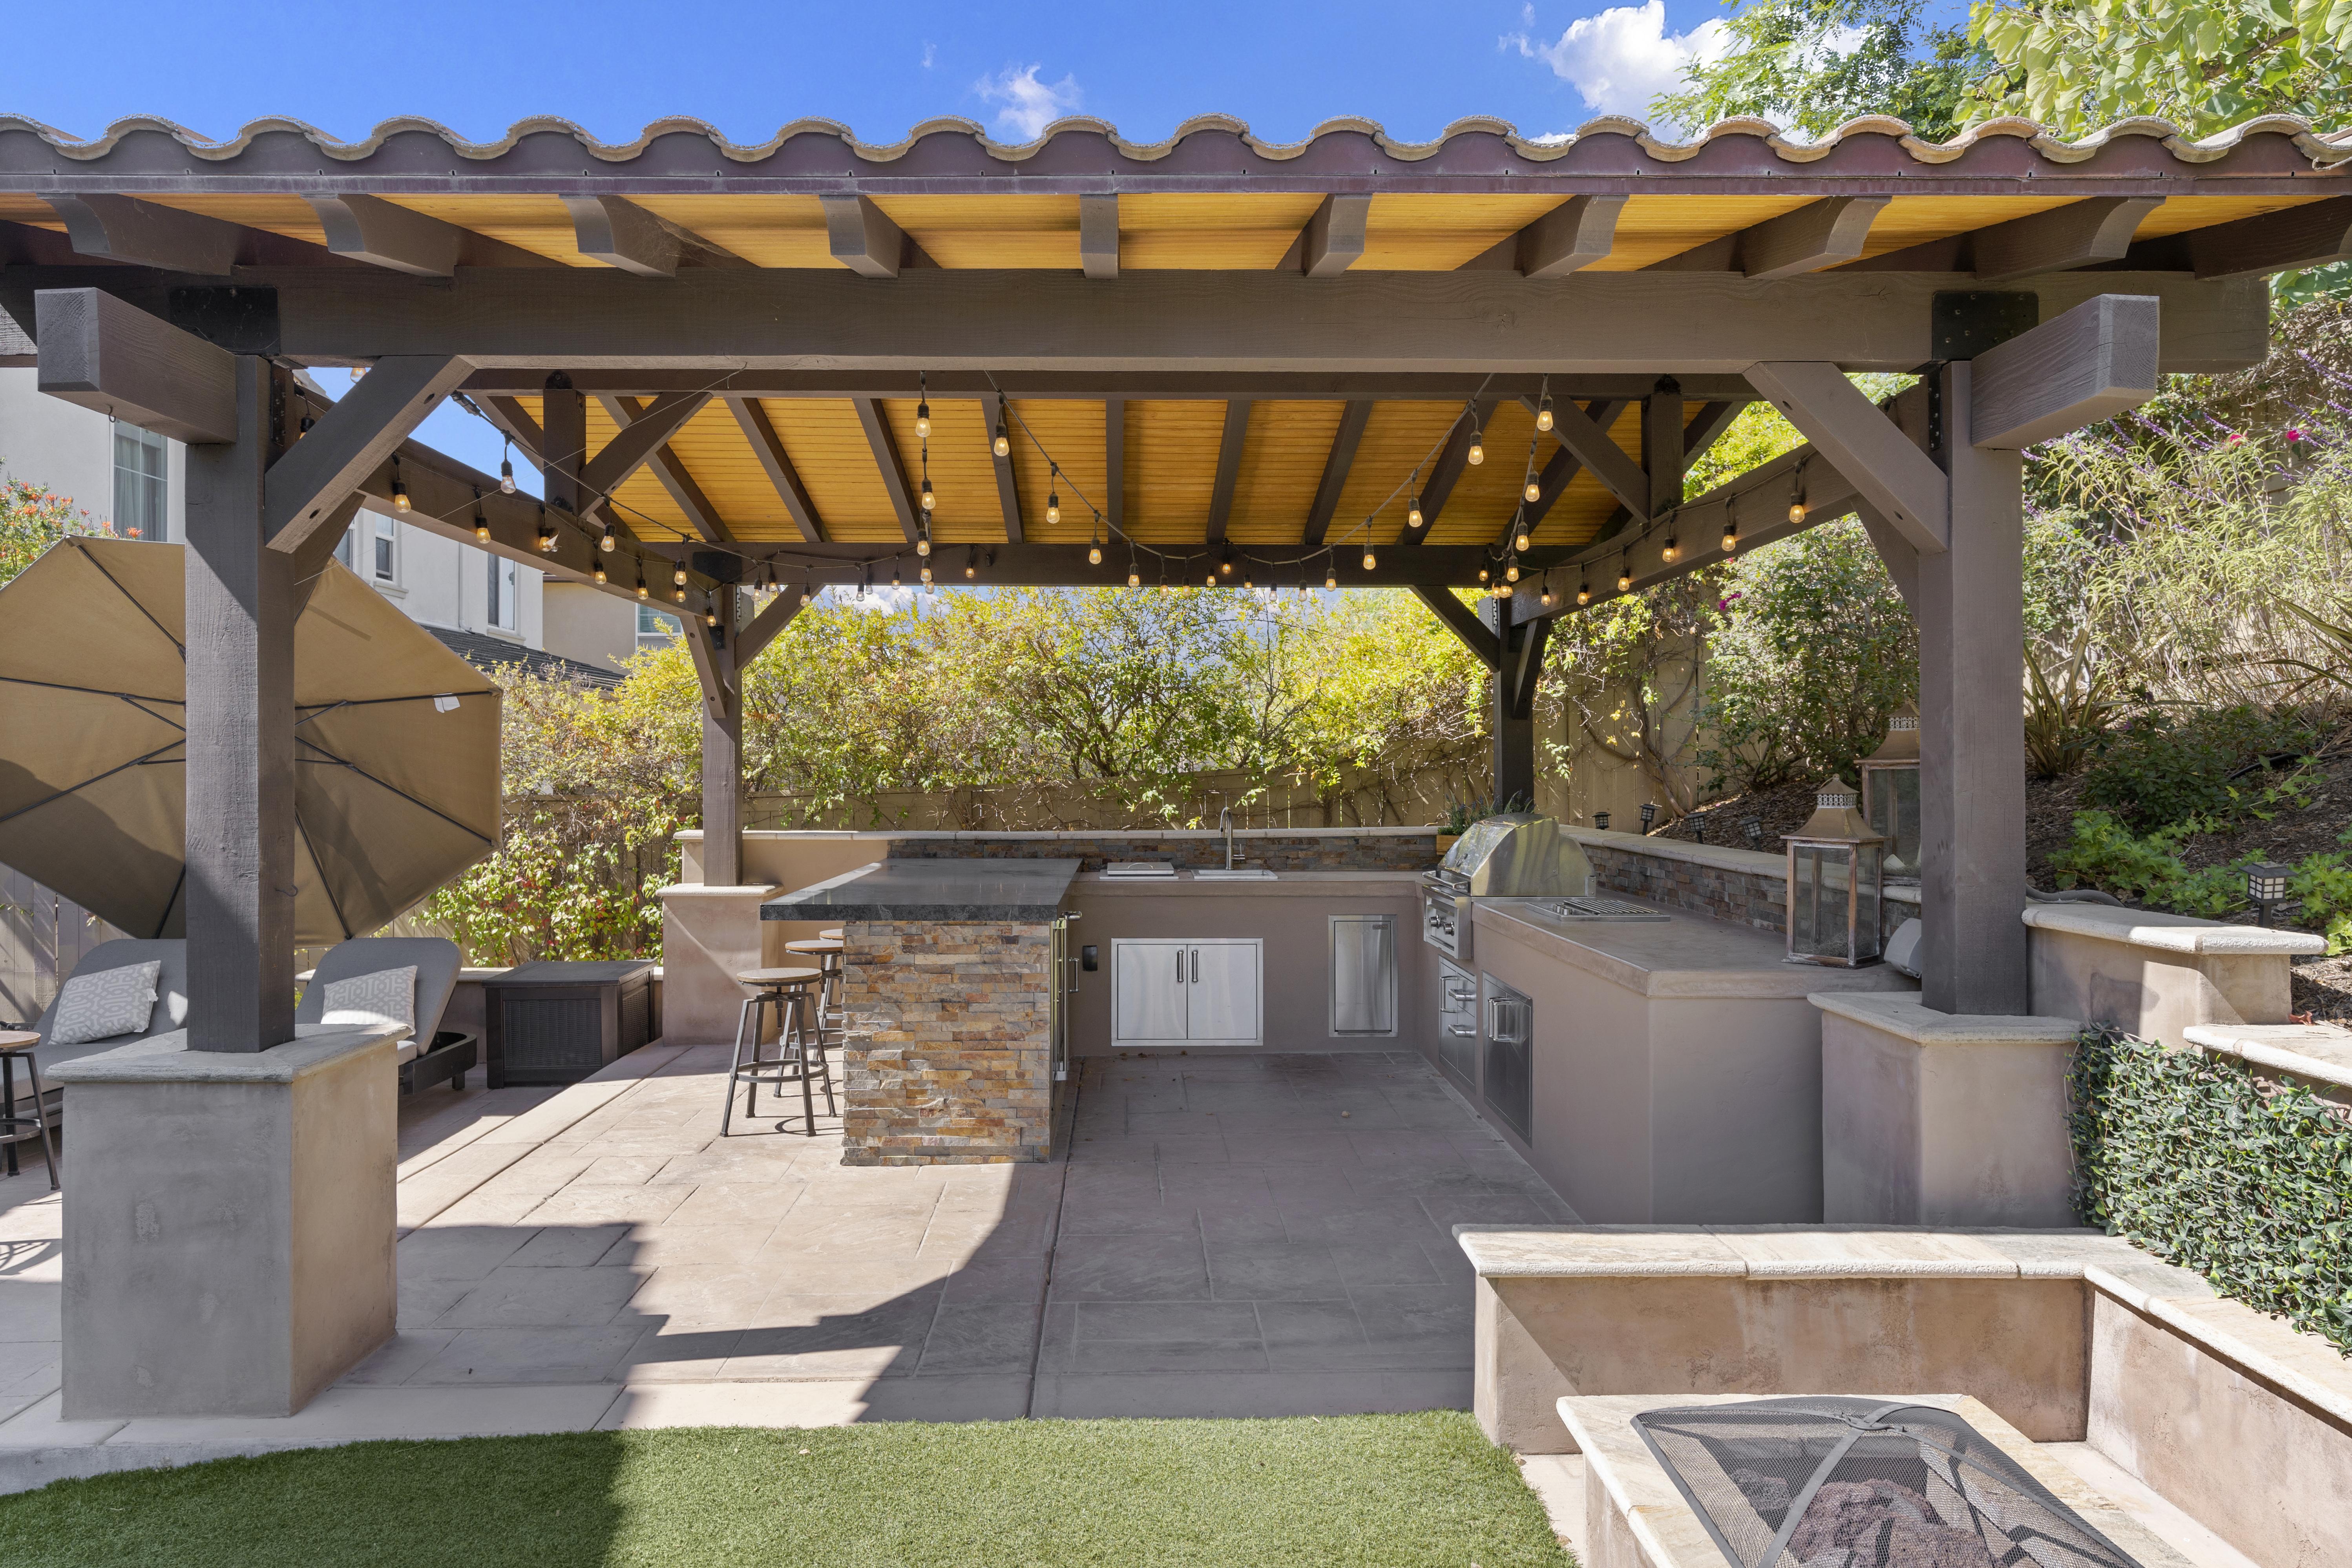 Outdoor kitchen with stone countertop and built-in grill